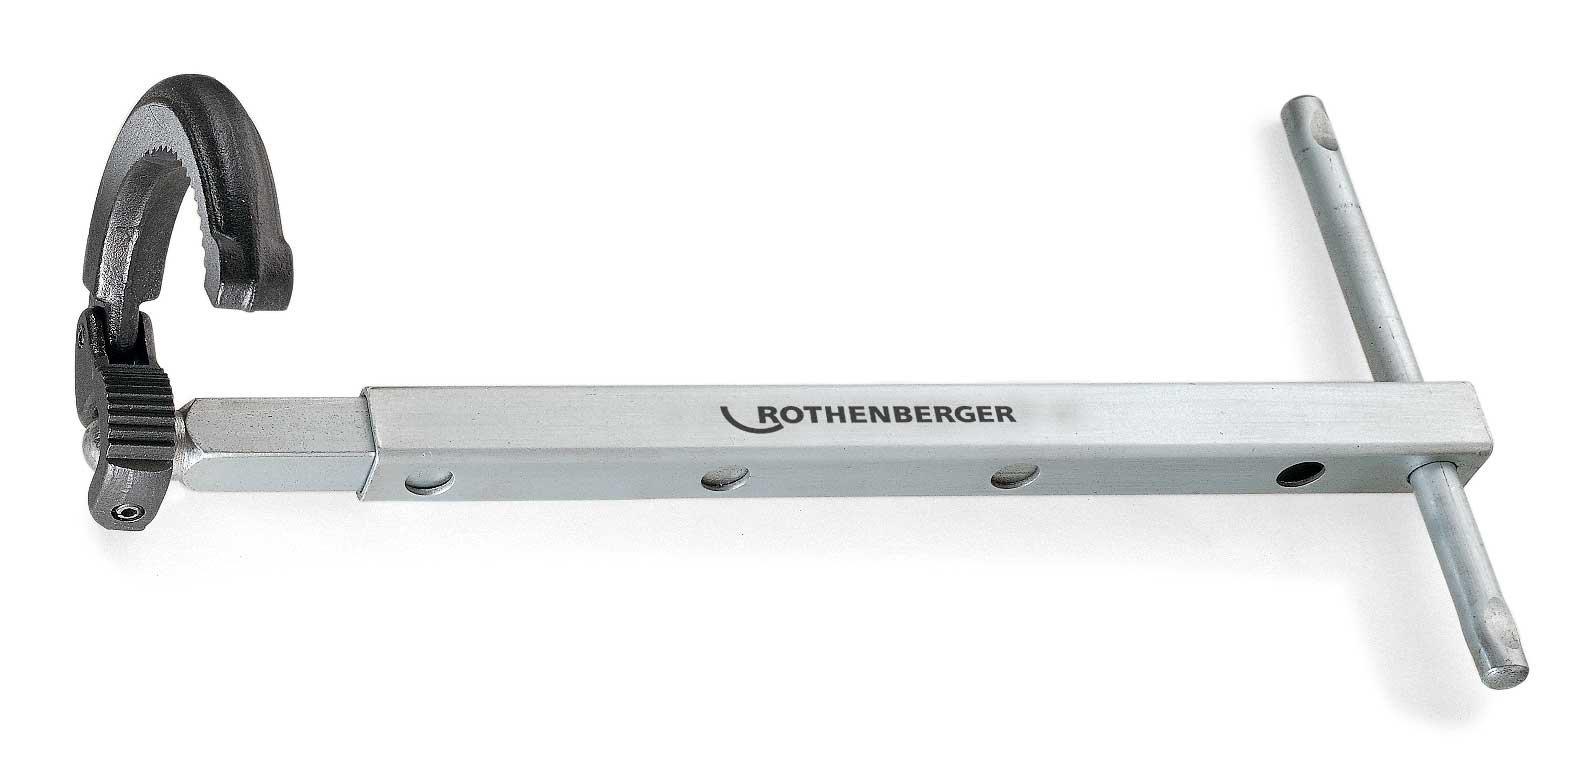 rothenberger telescopic. basin wrench 3/4"-1.7/8" (70226)